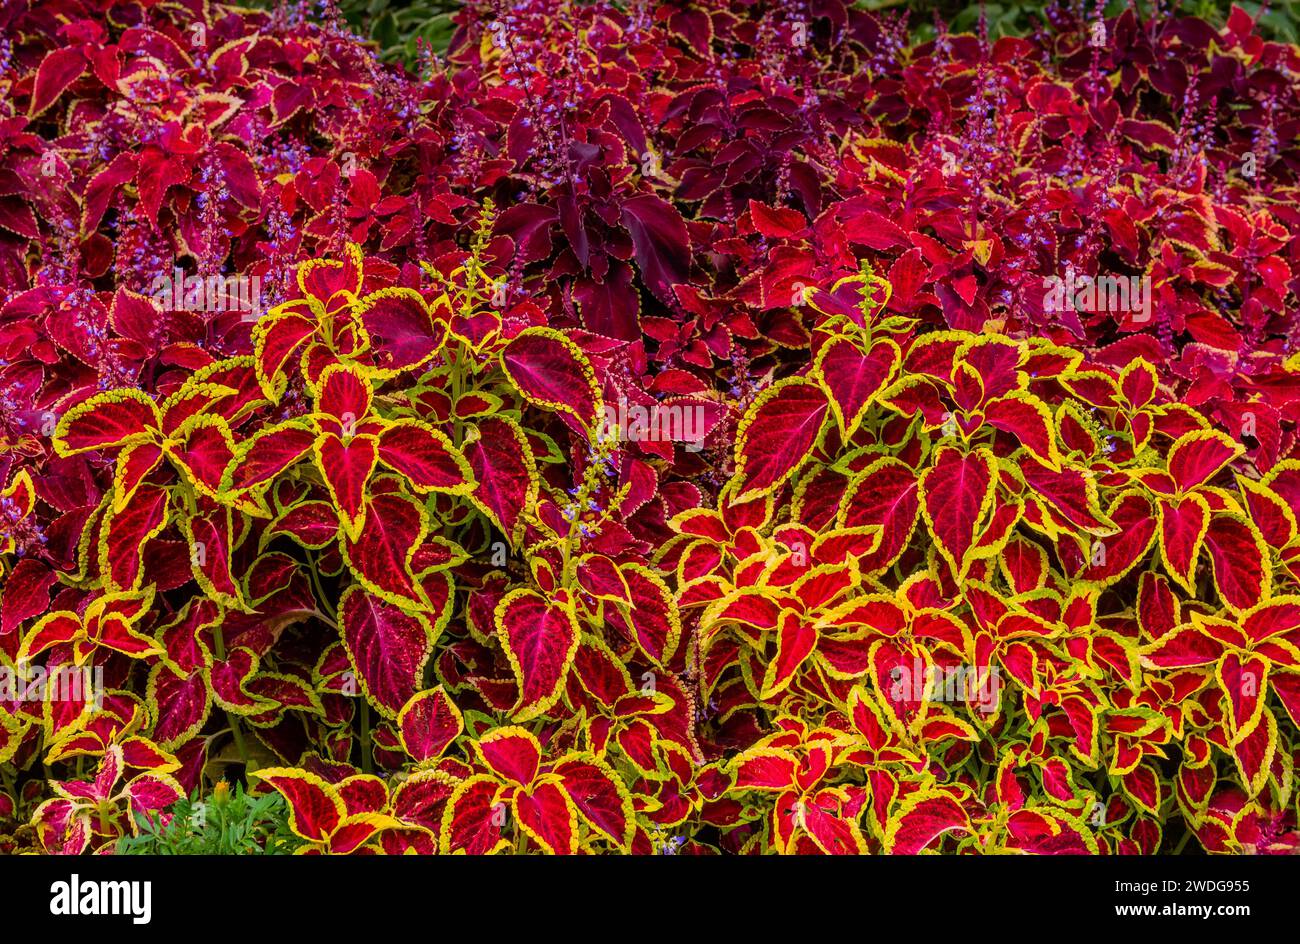 Beautiful bed of coleus shade, Wizard Scarlet leaf flowers in deep reds and greens, South Korea, South Korea Stock Photo